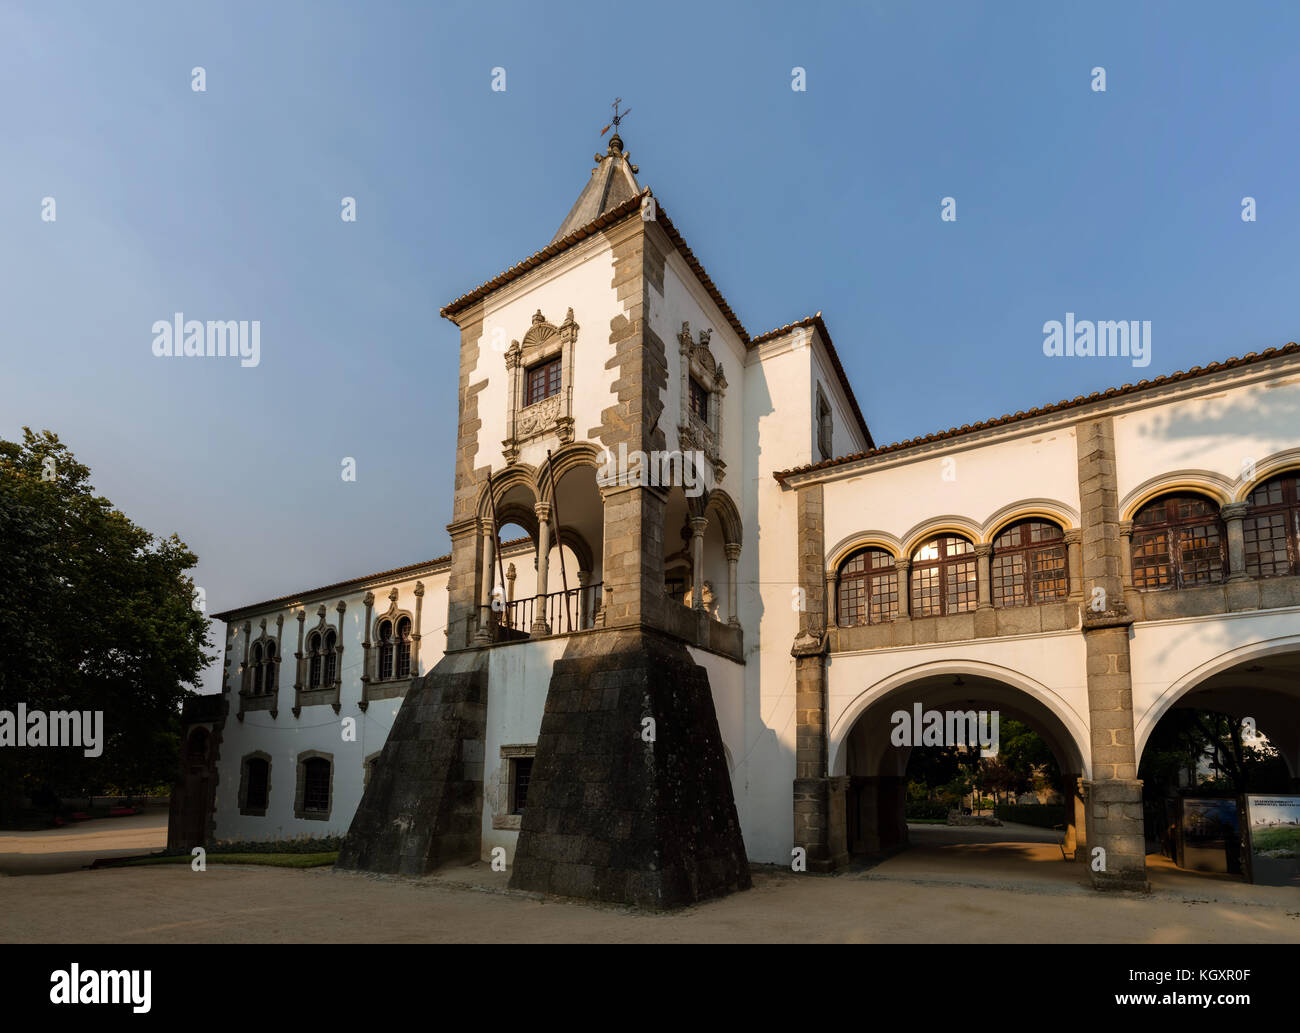 The Royal Palace of Evora, a former royal residence of the Kings of Portugal since the 14th century, one of the centers of the Portuguese Renaissance. Stock Photo